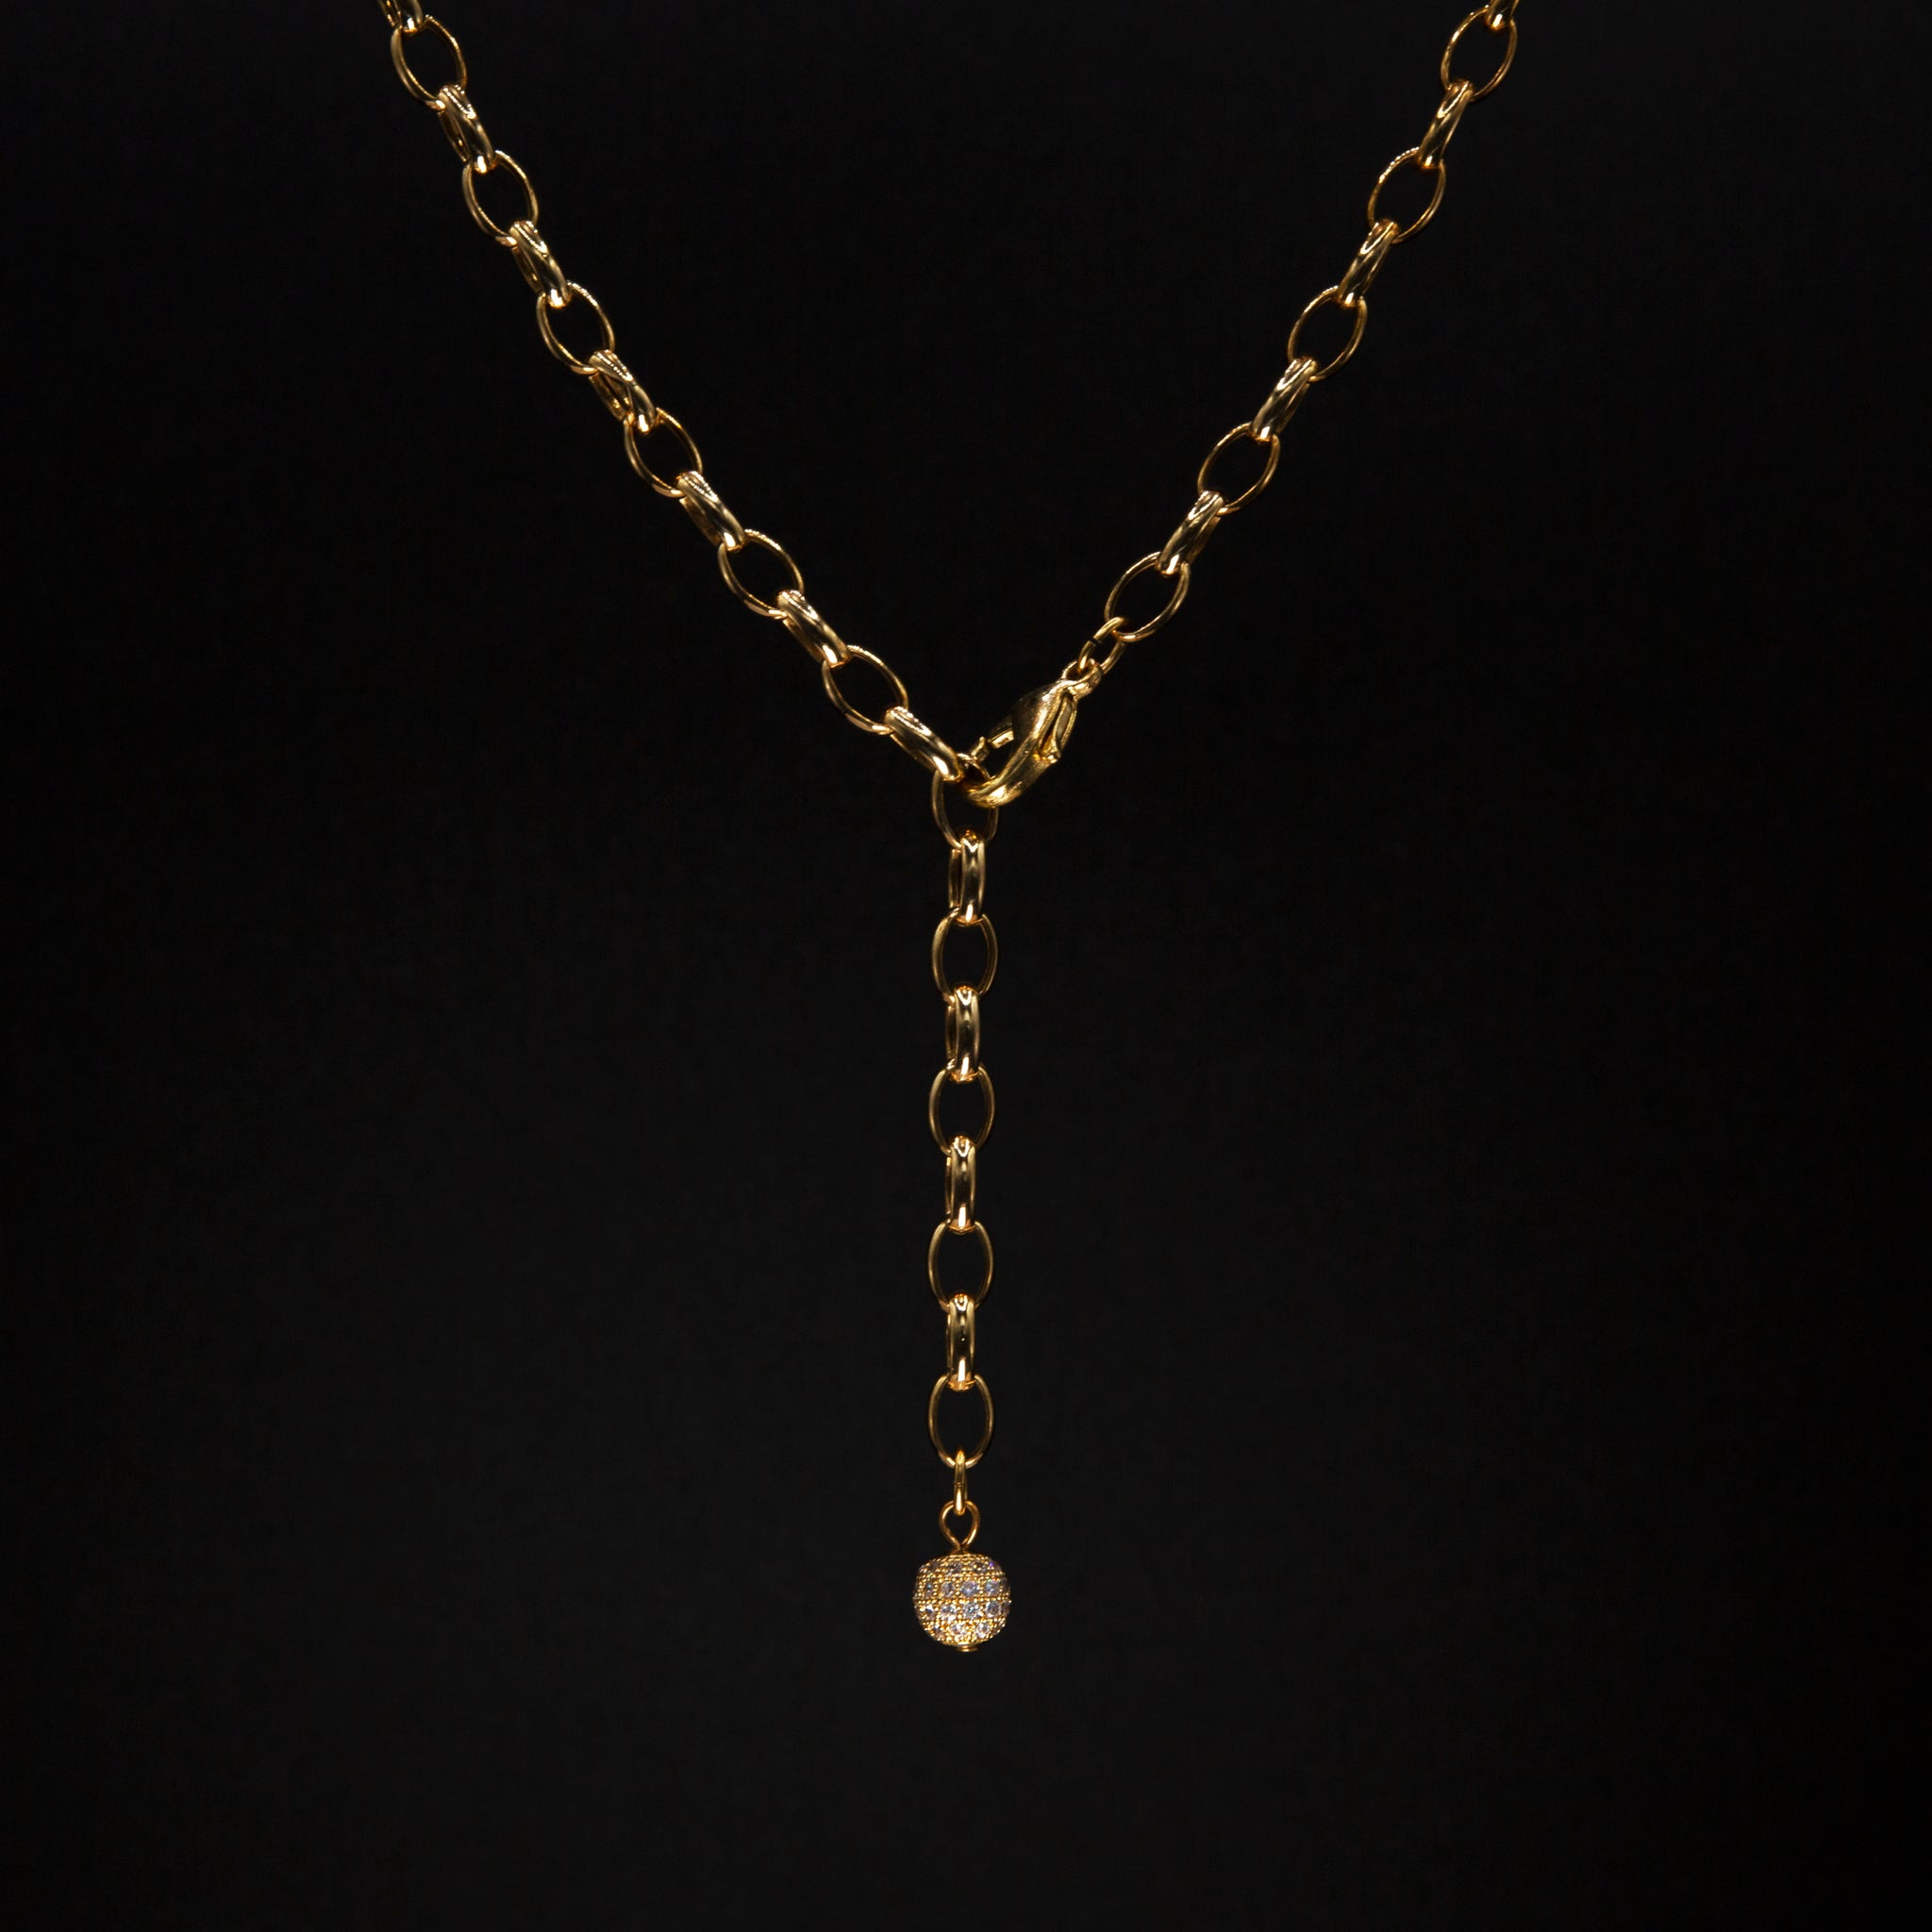 Gilded Chain Necklace with Drop